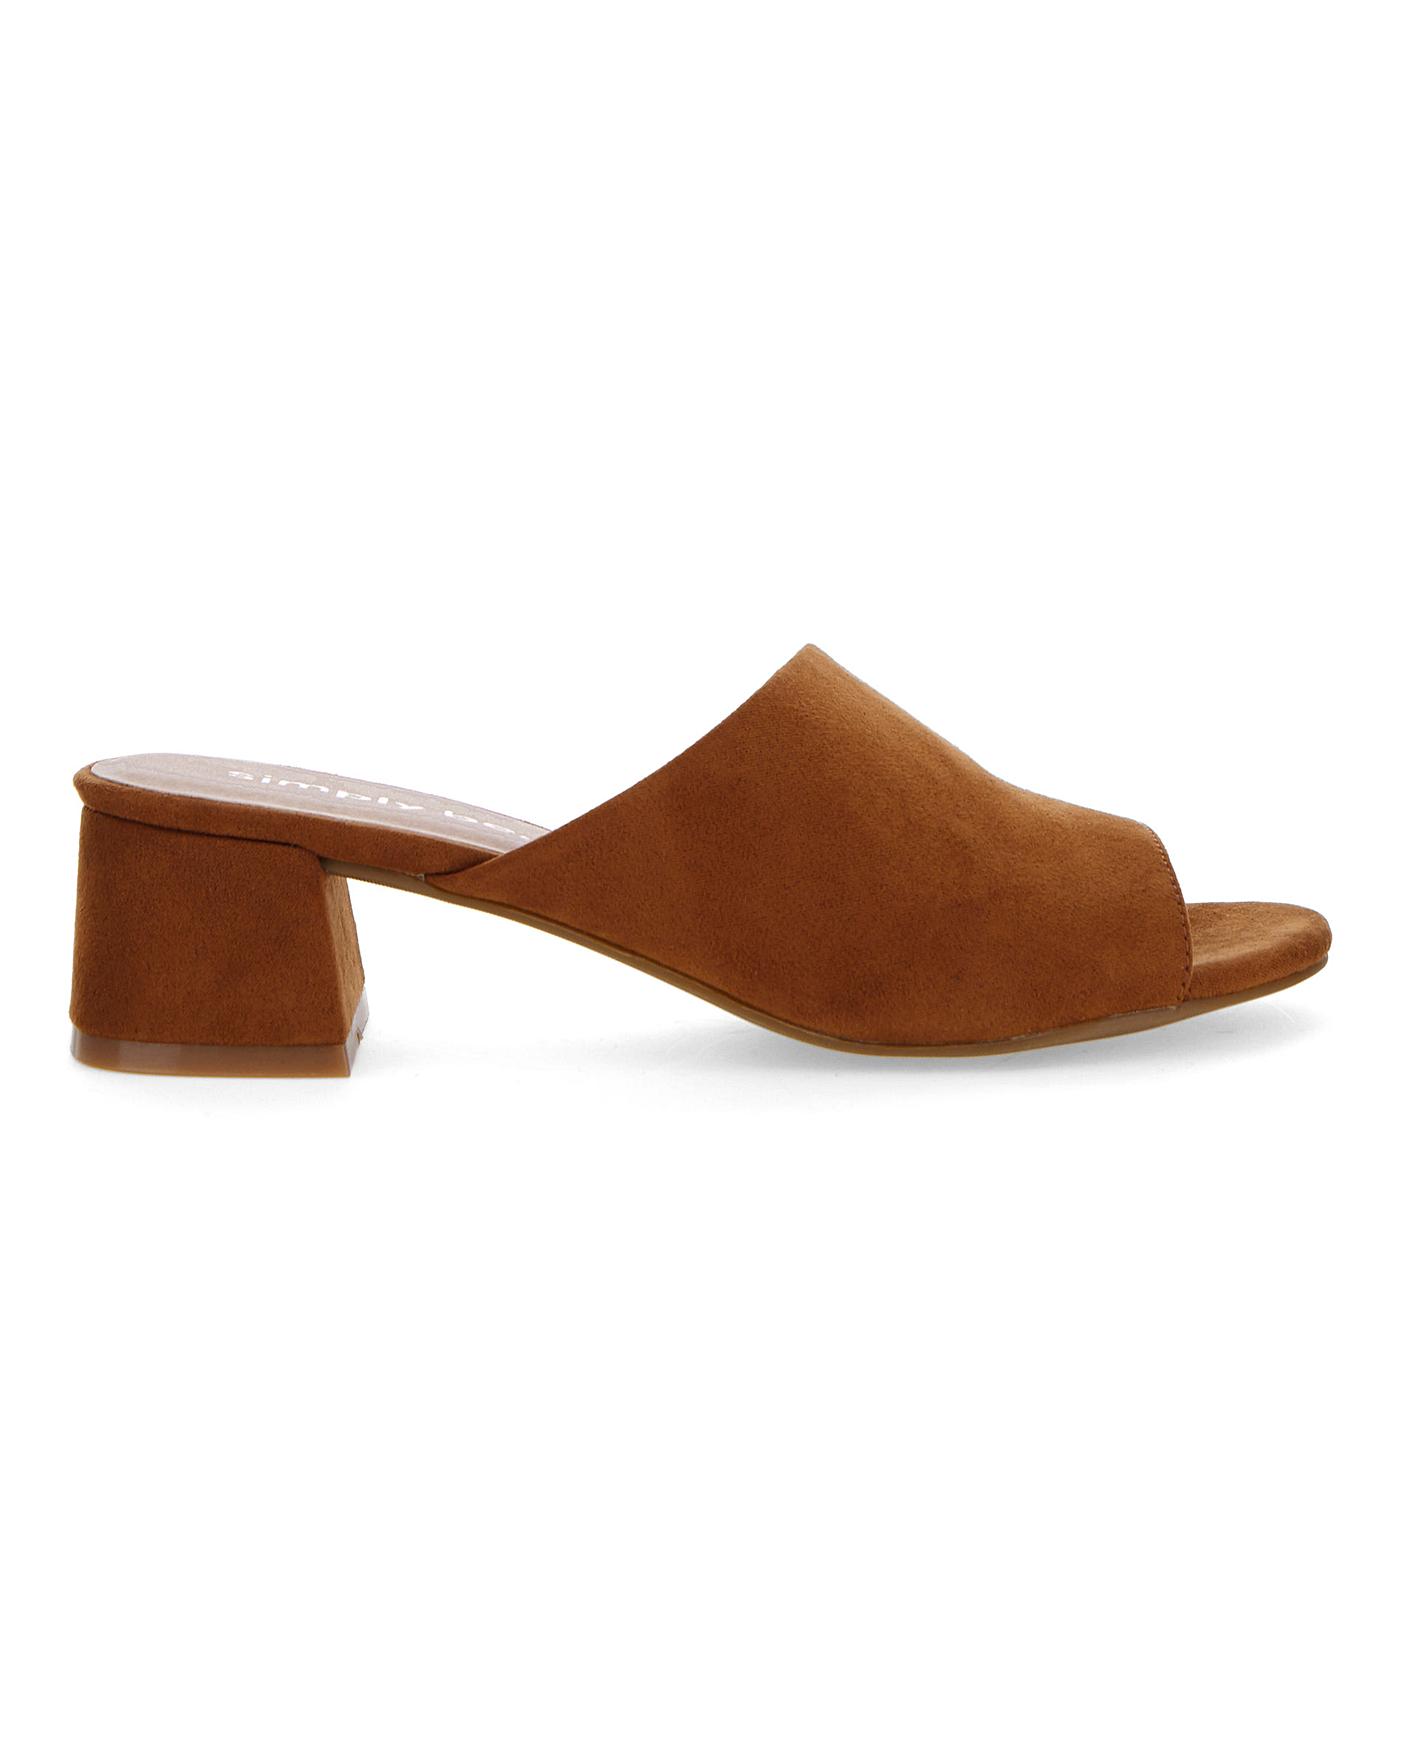 extra wide clogs and mules